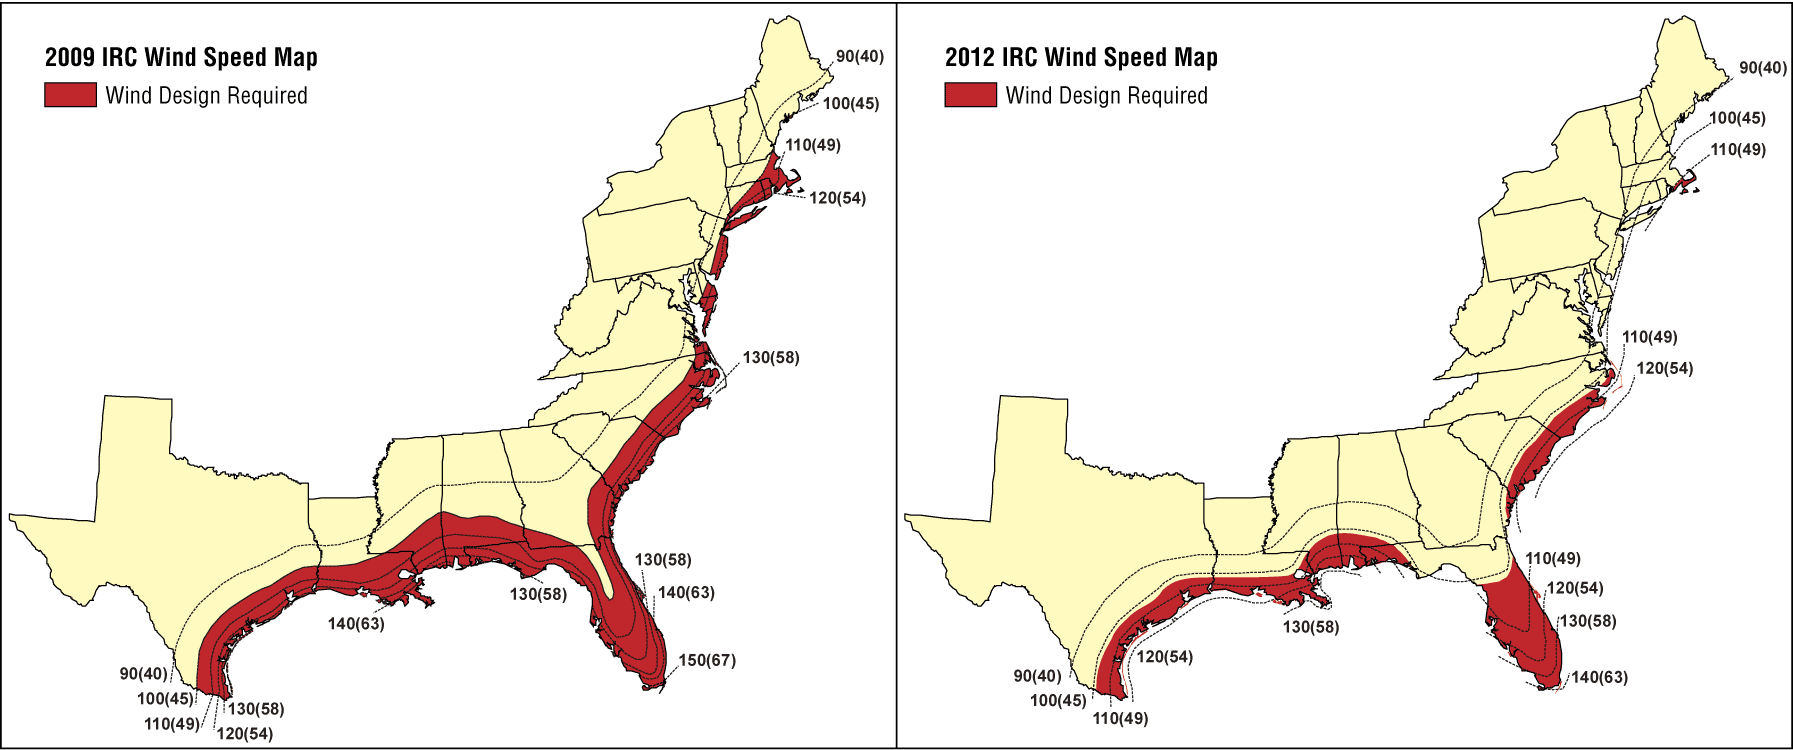 2009 and 2012 IRC wind speed maps.